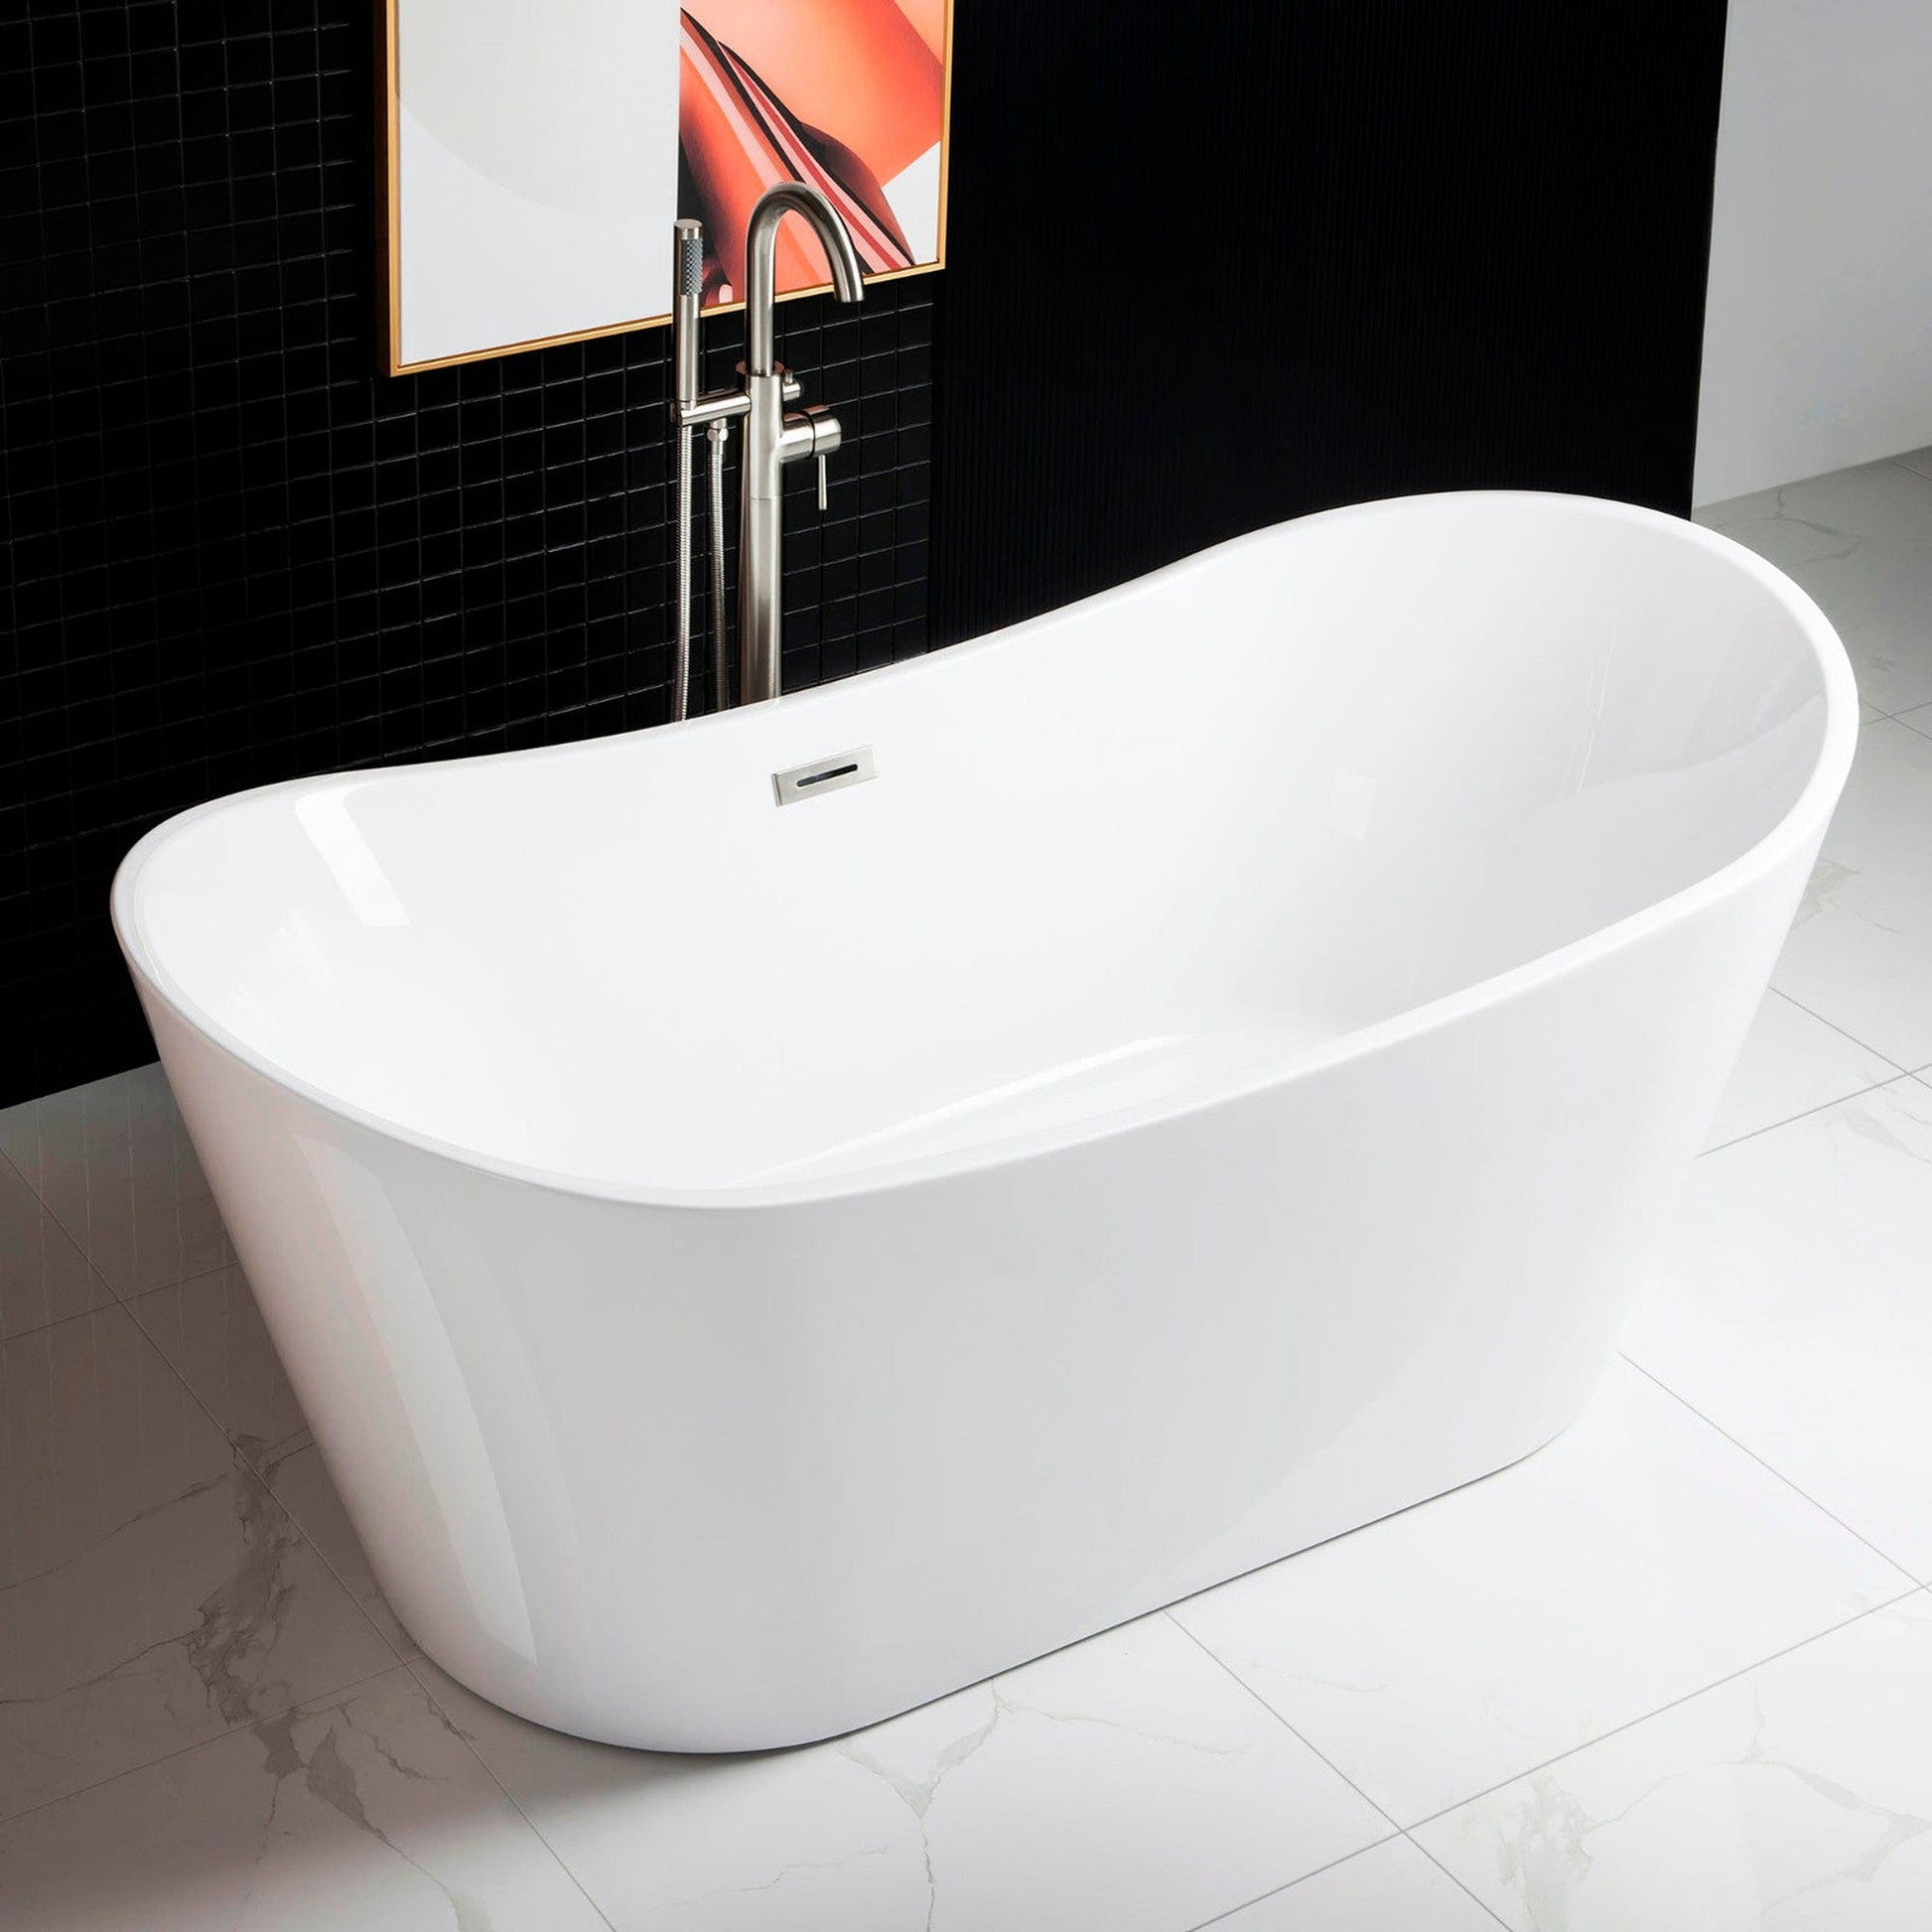 WoodBridge B0010 67" White Acrylic Freestanding Contemporary Soaking Bathtub With Chrome Drain, Overflow, F0002CHRD Tub Filler and Caddy Tray